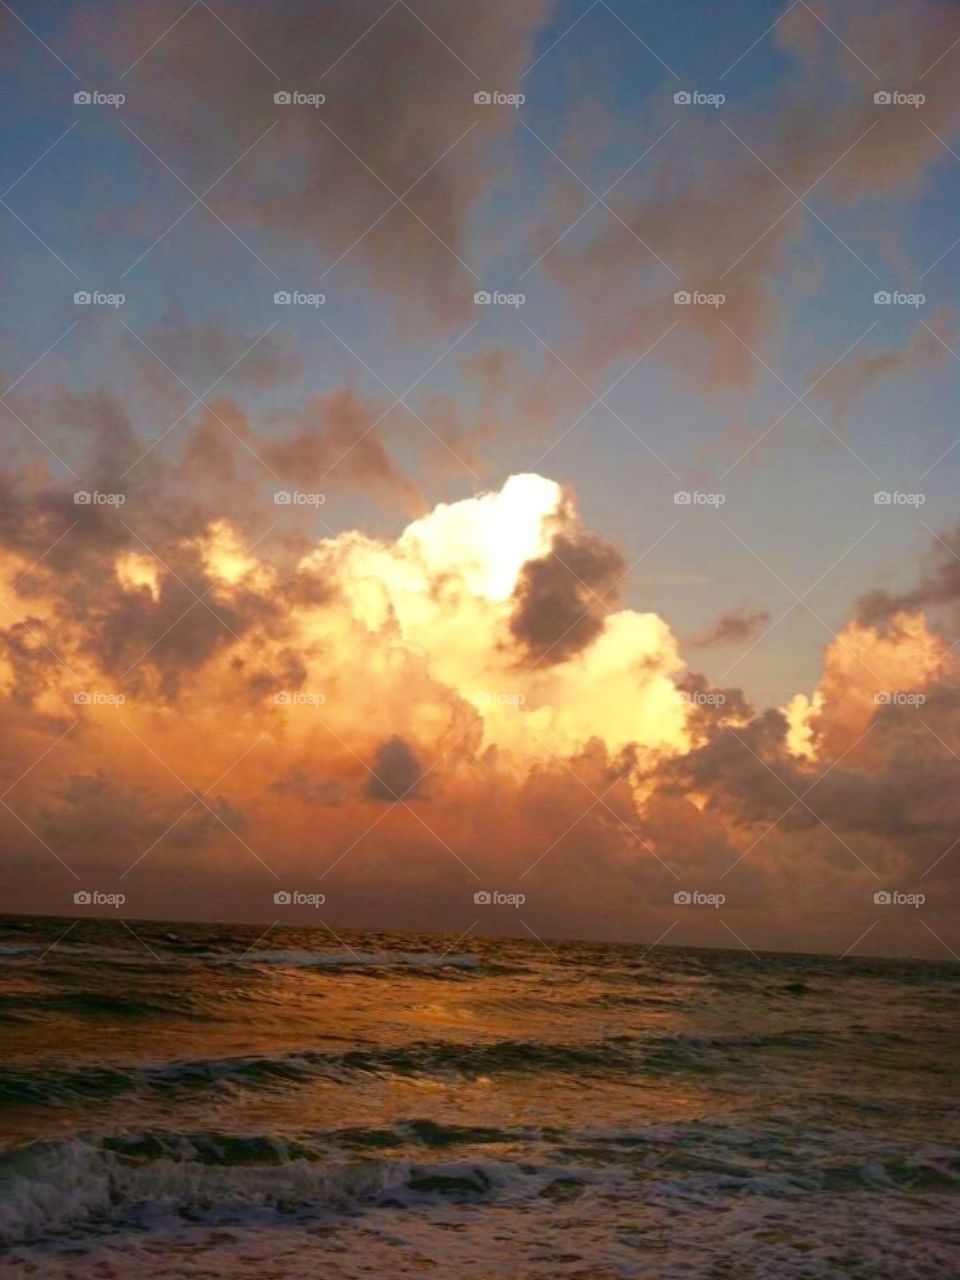 Clouds over water 